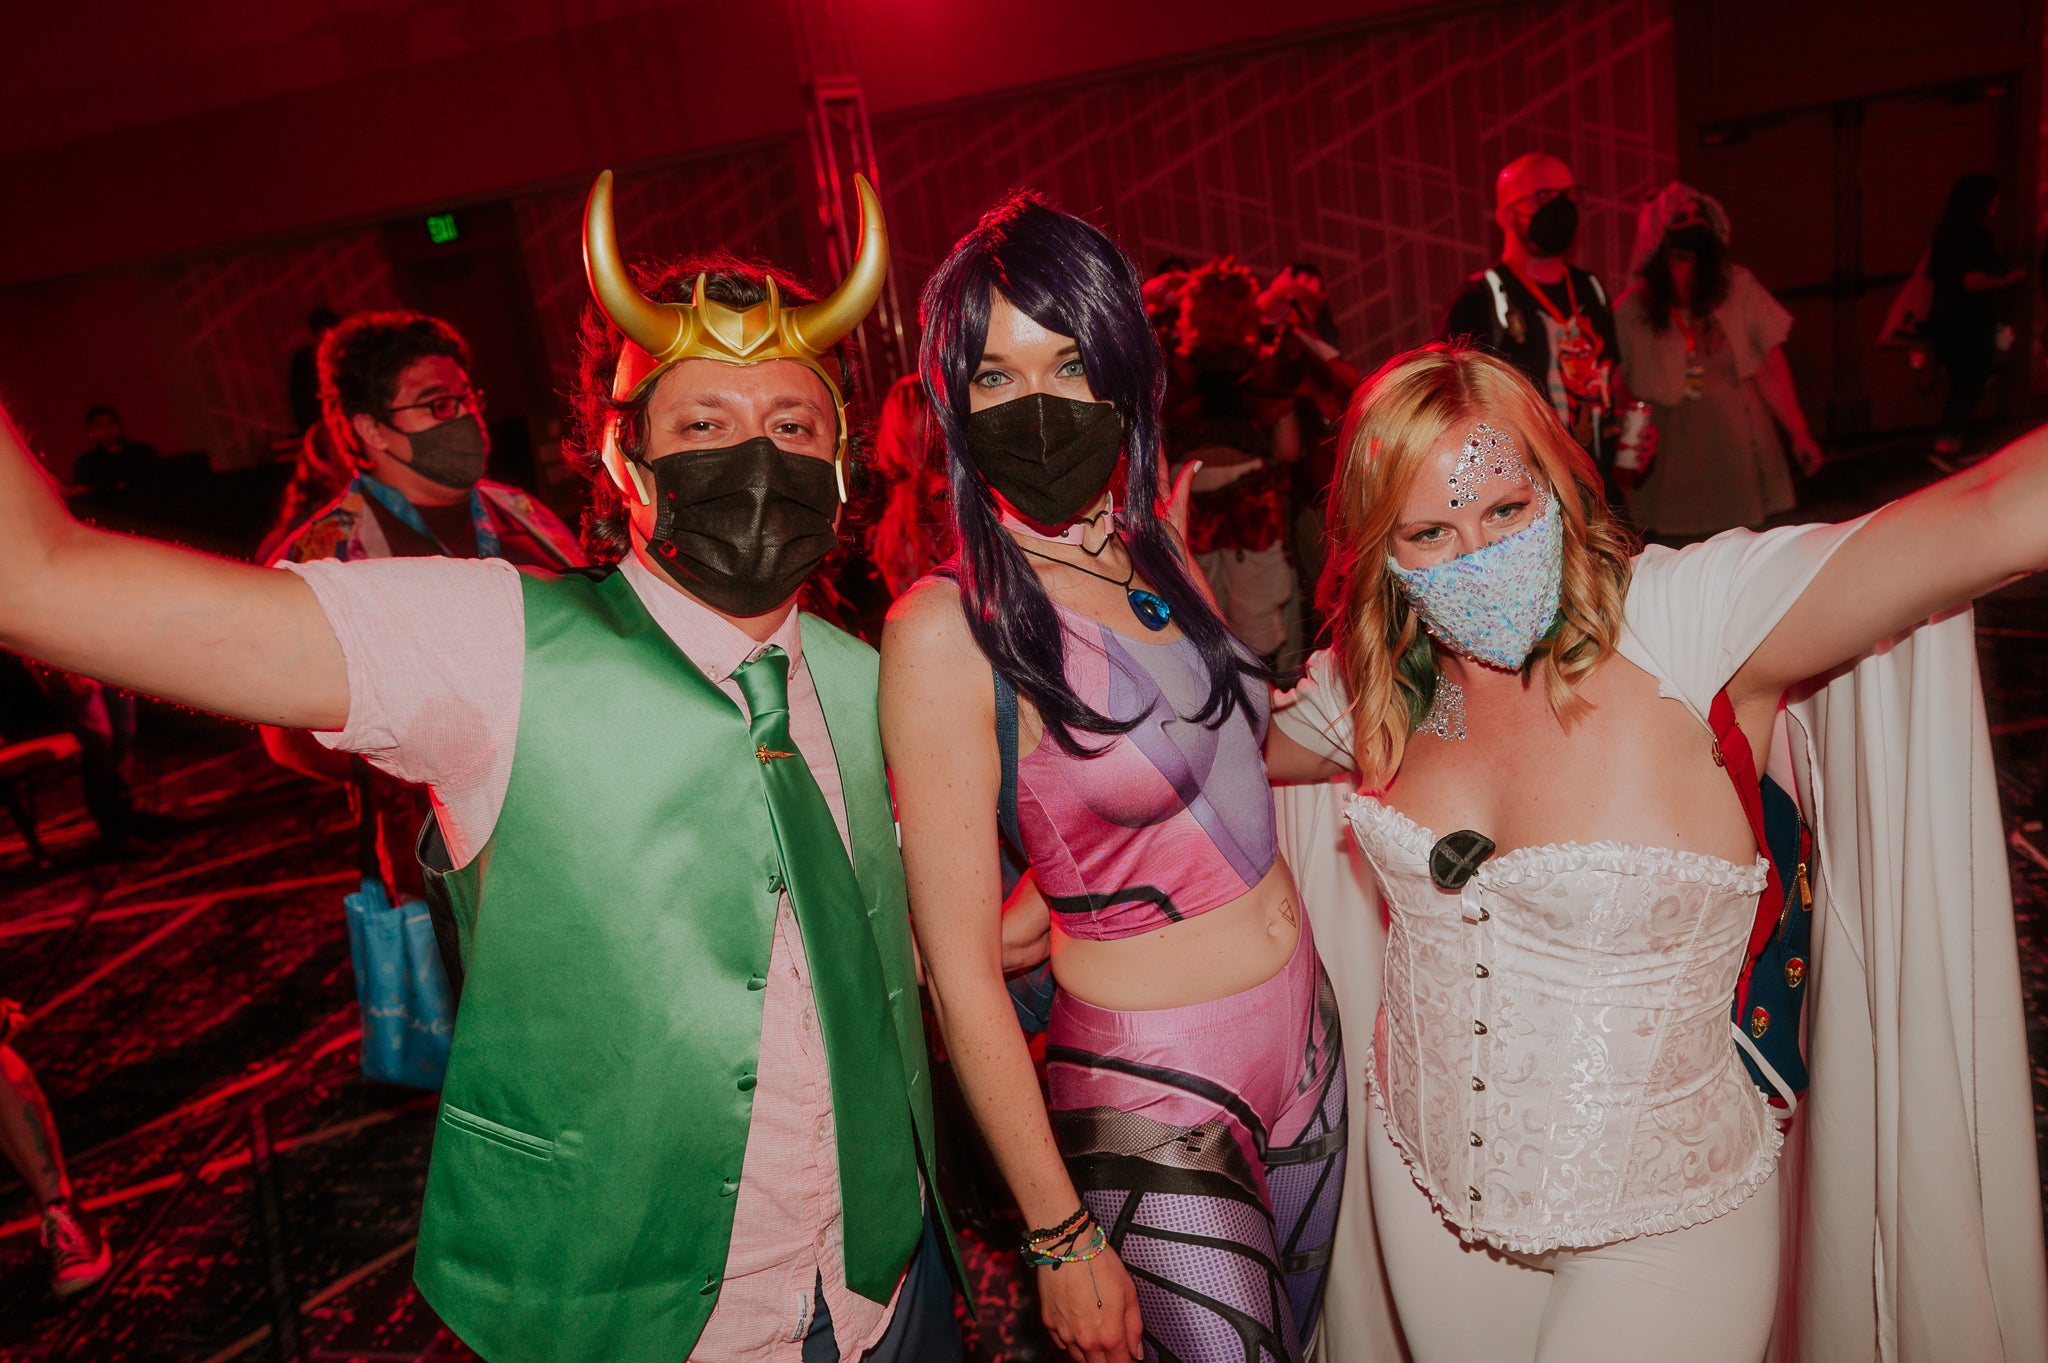 ECCC Cosplay after party August 20 2022